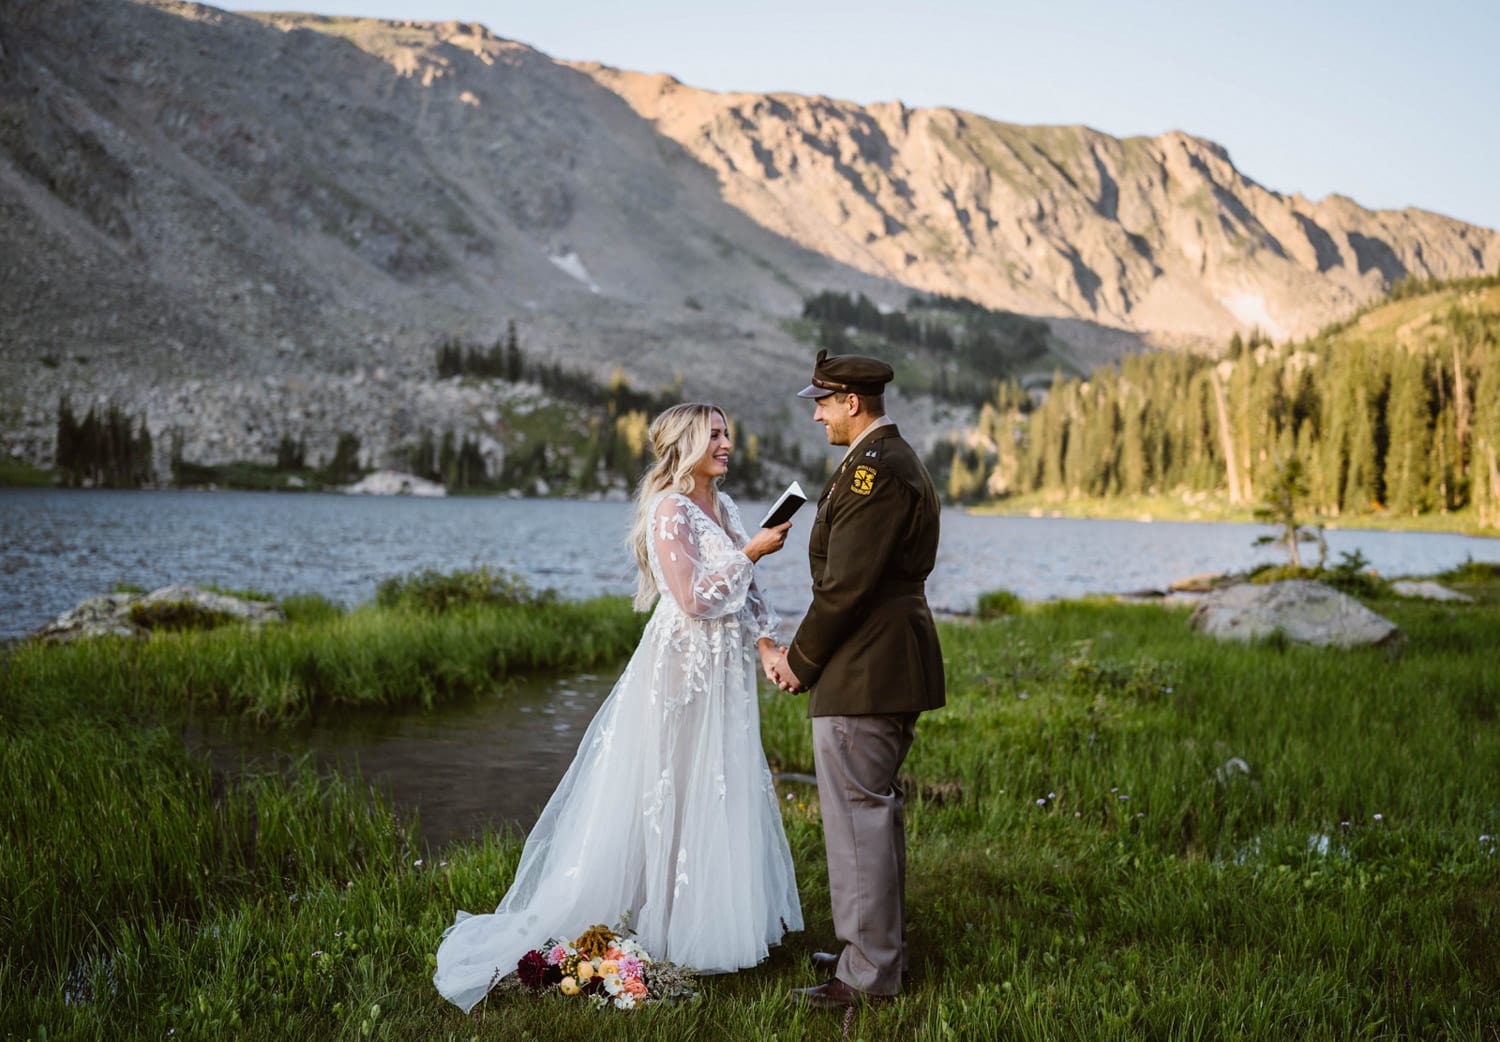 A couple sharing a laugh during their vow ceremony in the mountains of Colorado.